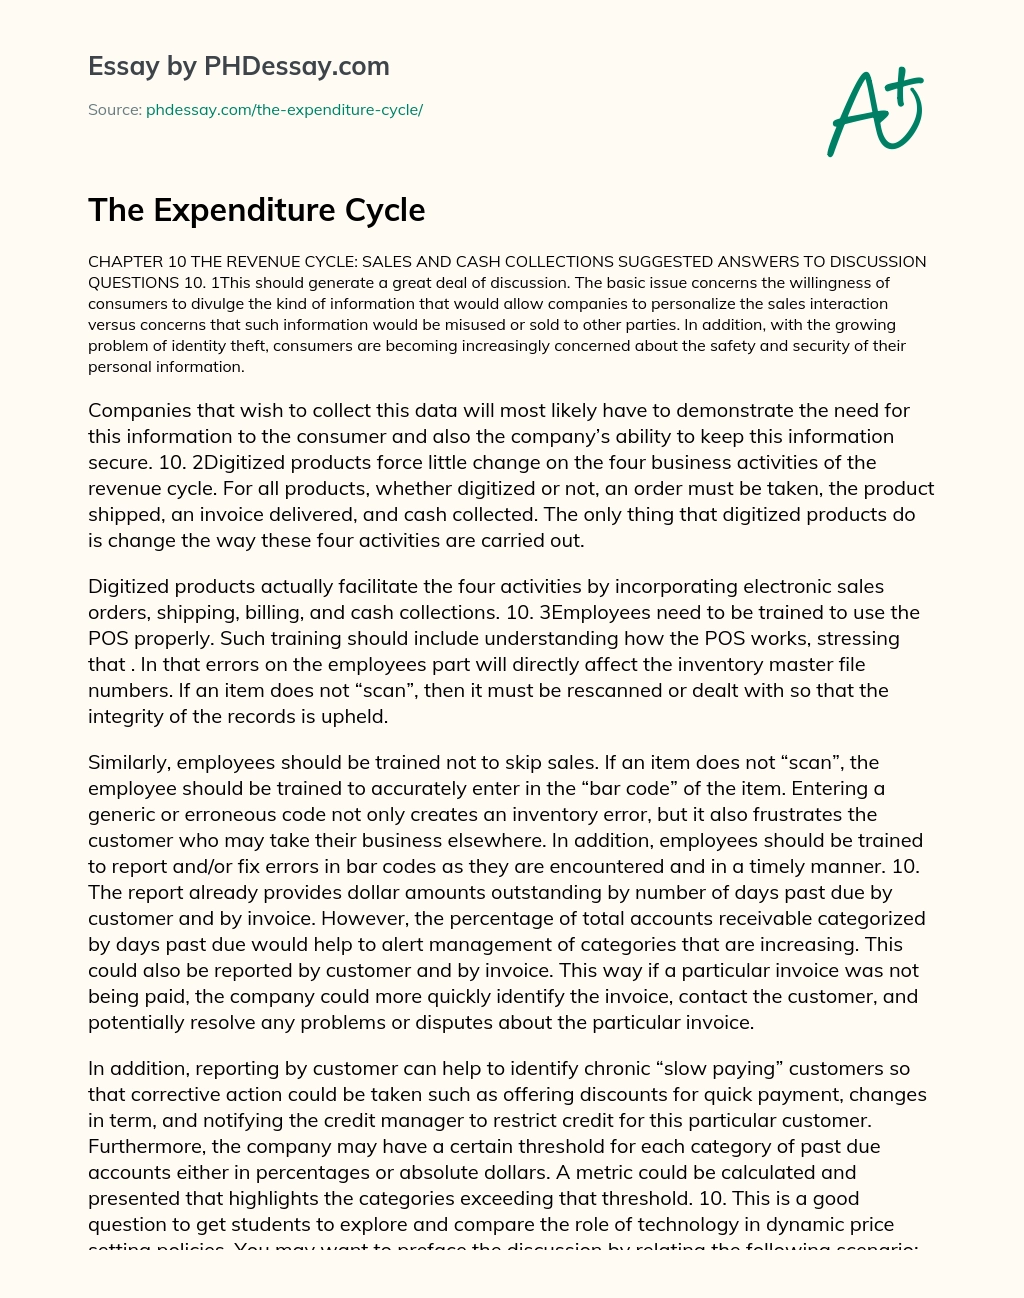 The Expenditure Cycle essay